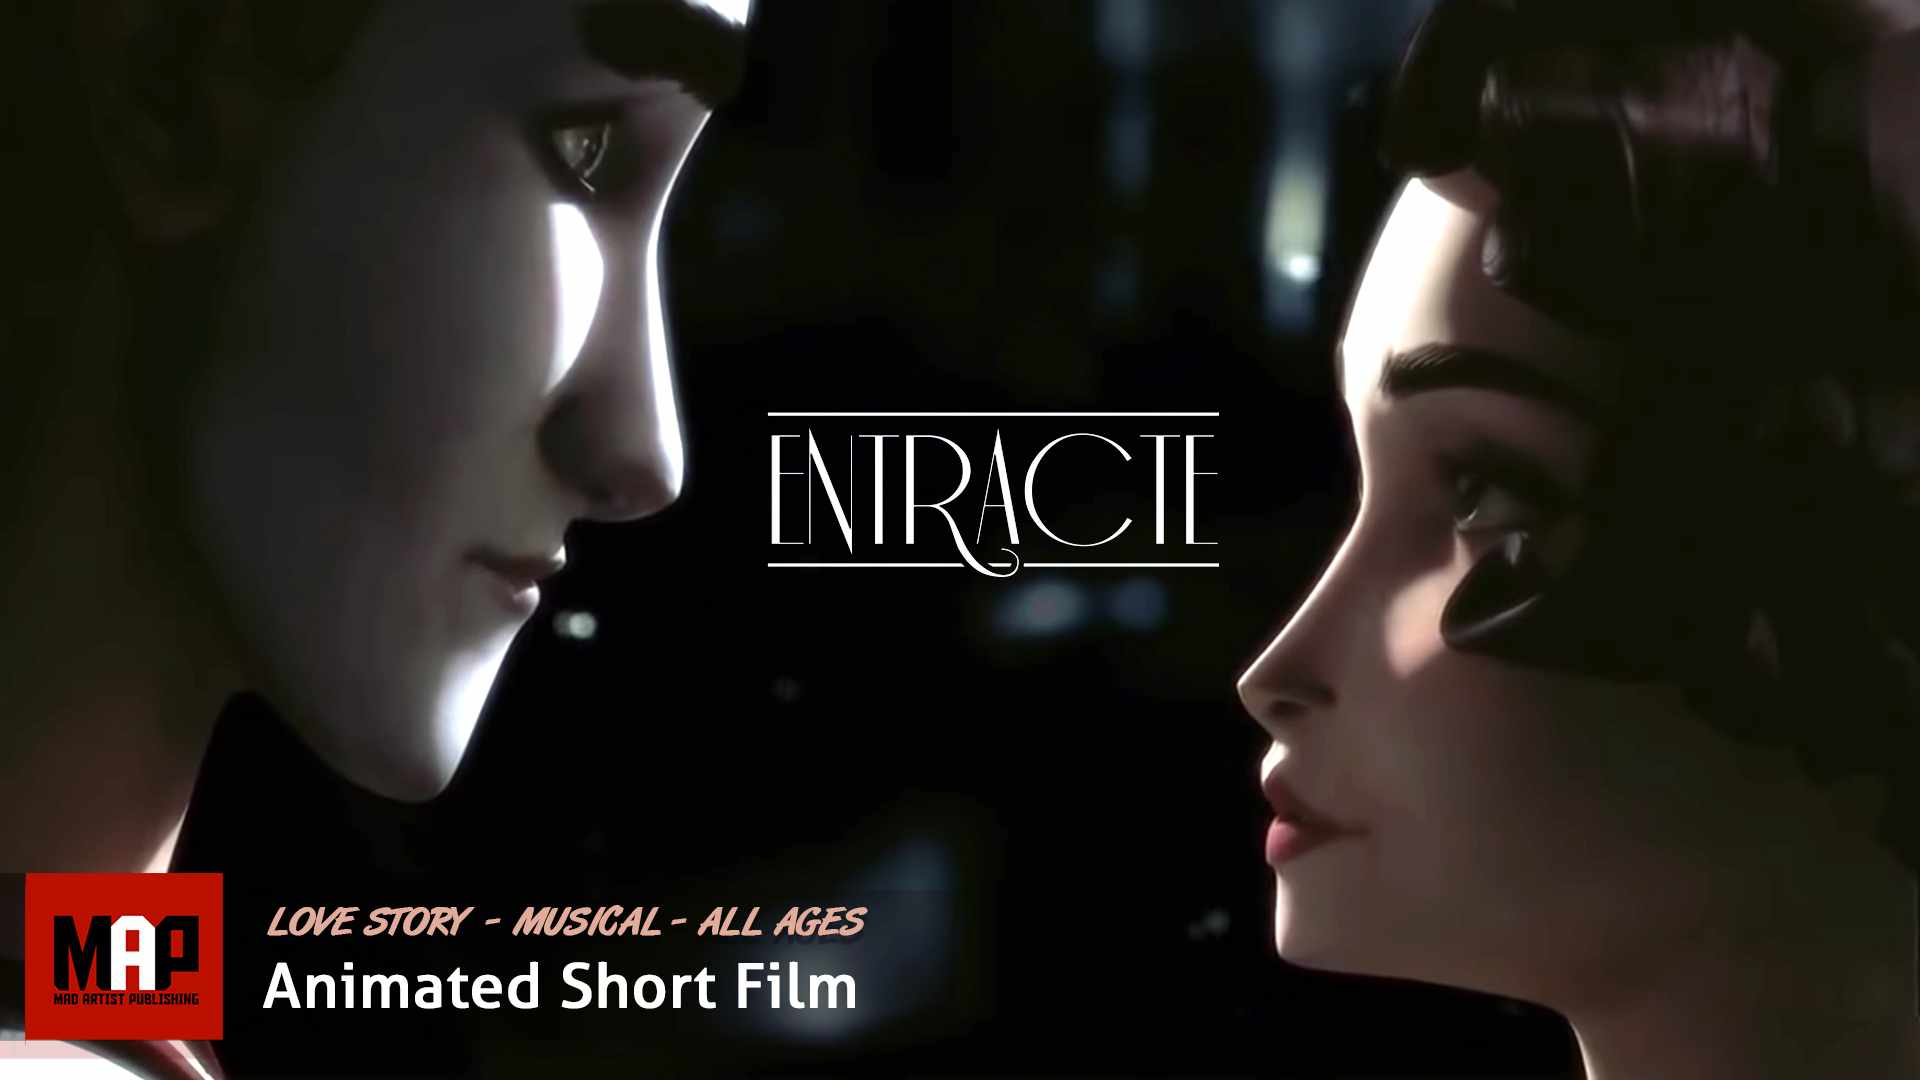 Love Story Musical CGI 3d Animated Short Film ** ENTRACTE ** Animation by ESMA